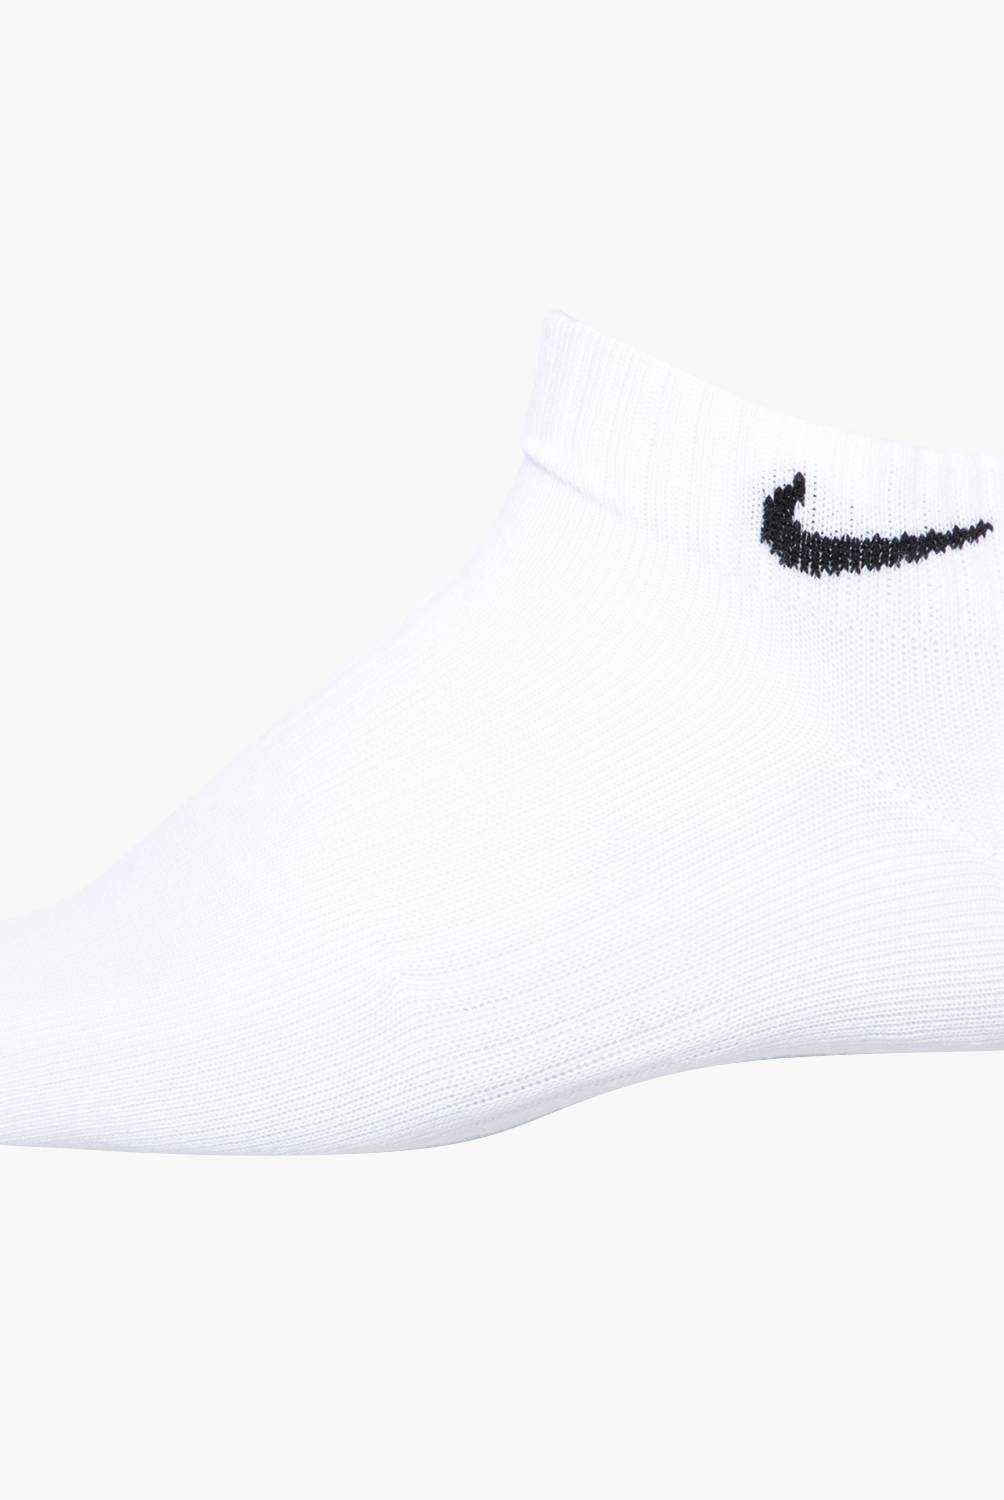 Nike - Nike Pack De 3 Calcetines Invisibles Deportivos